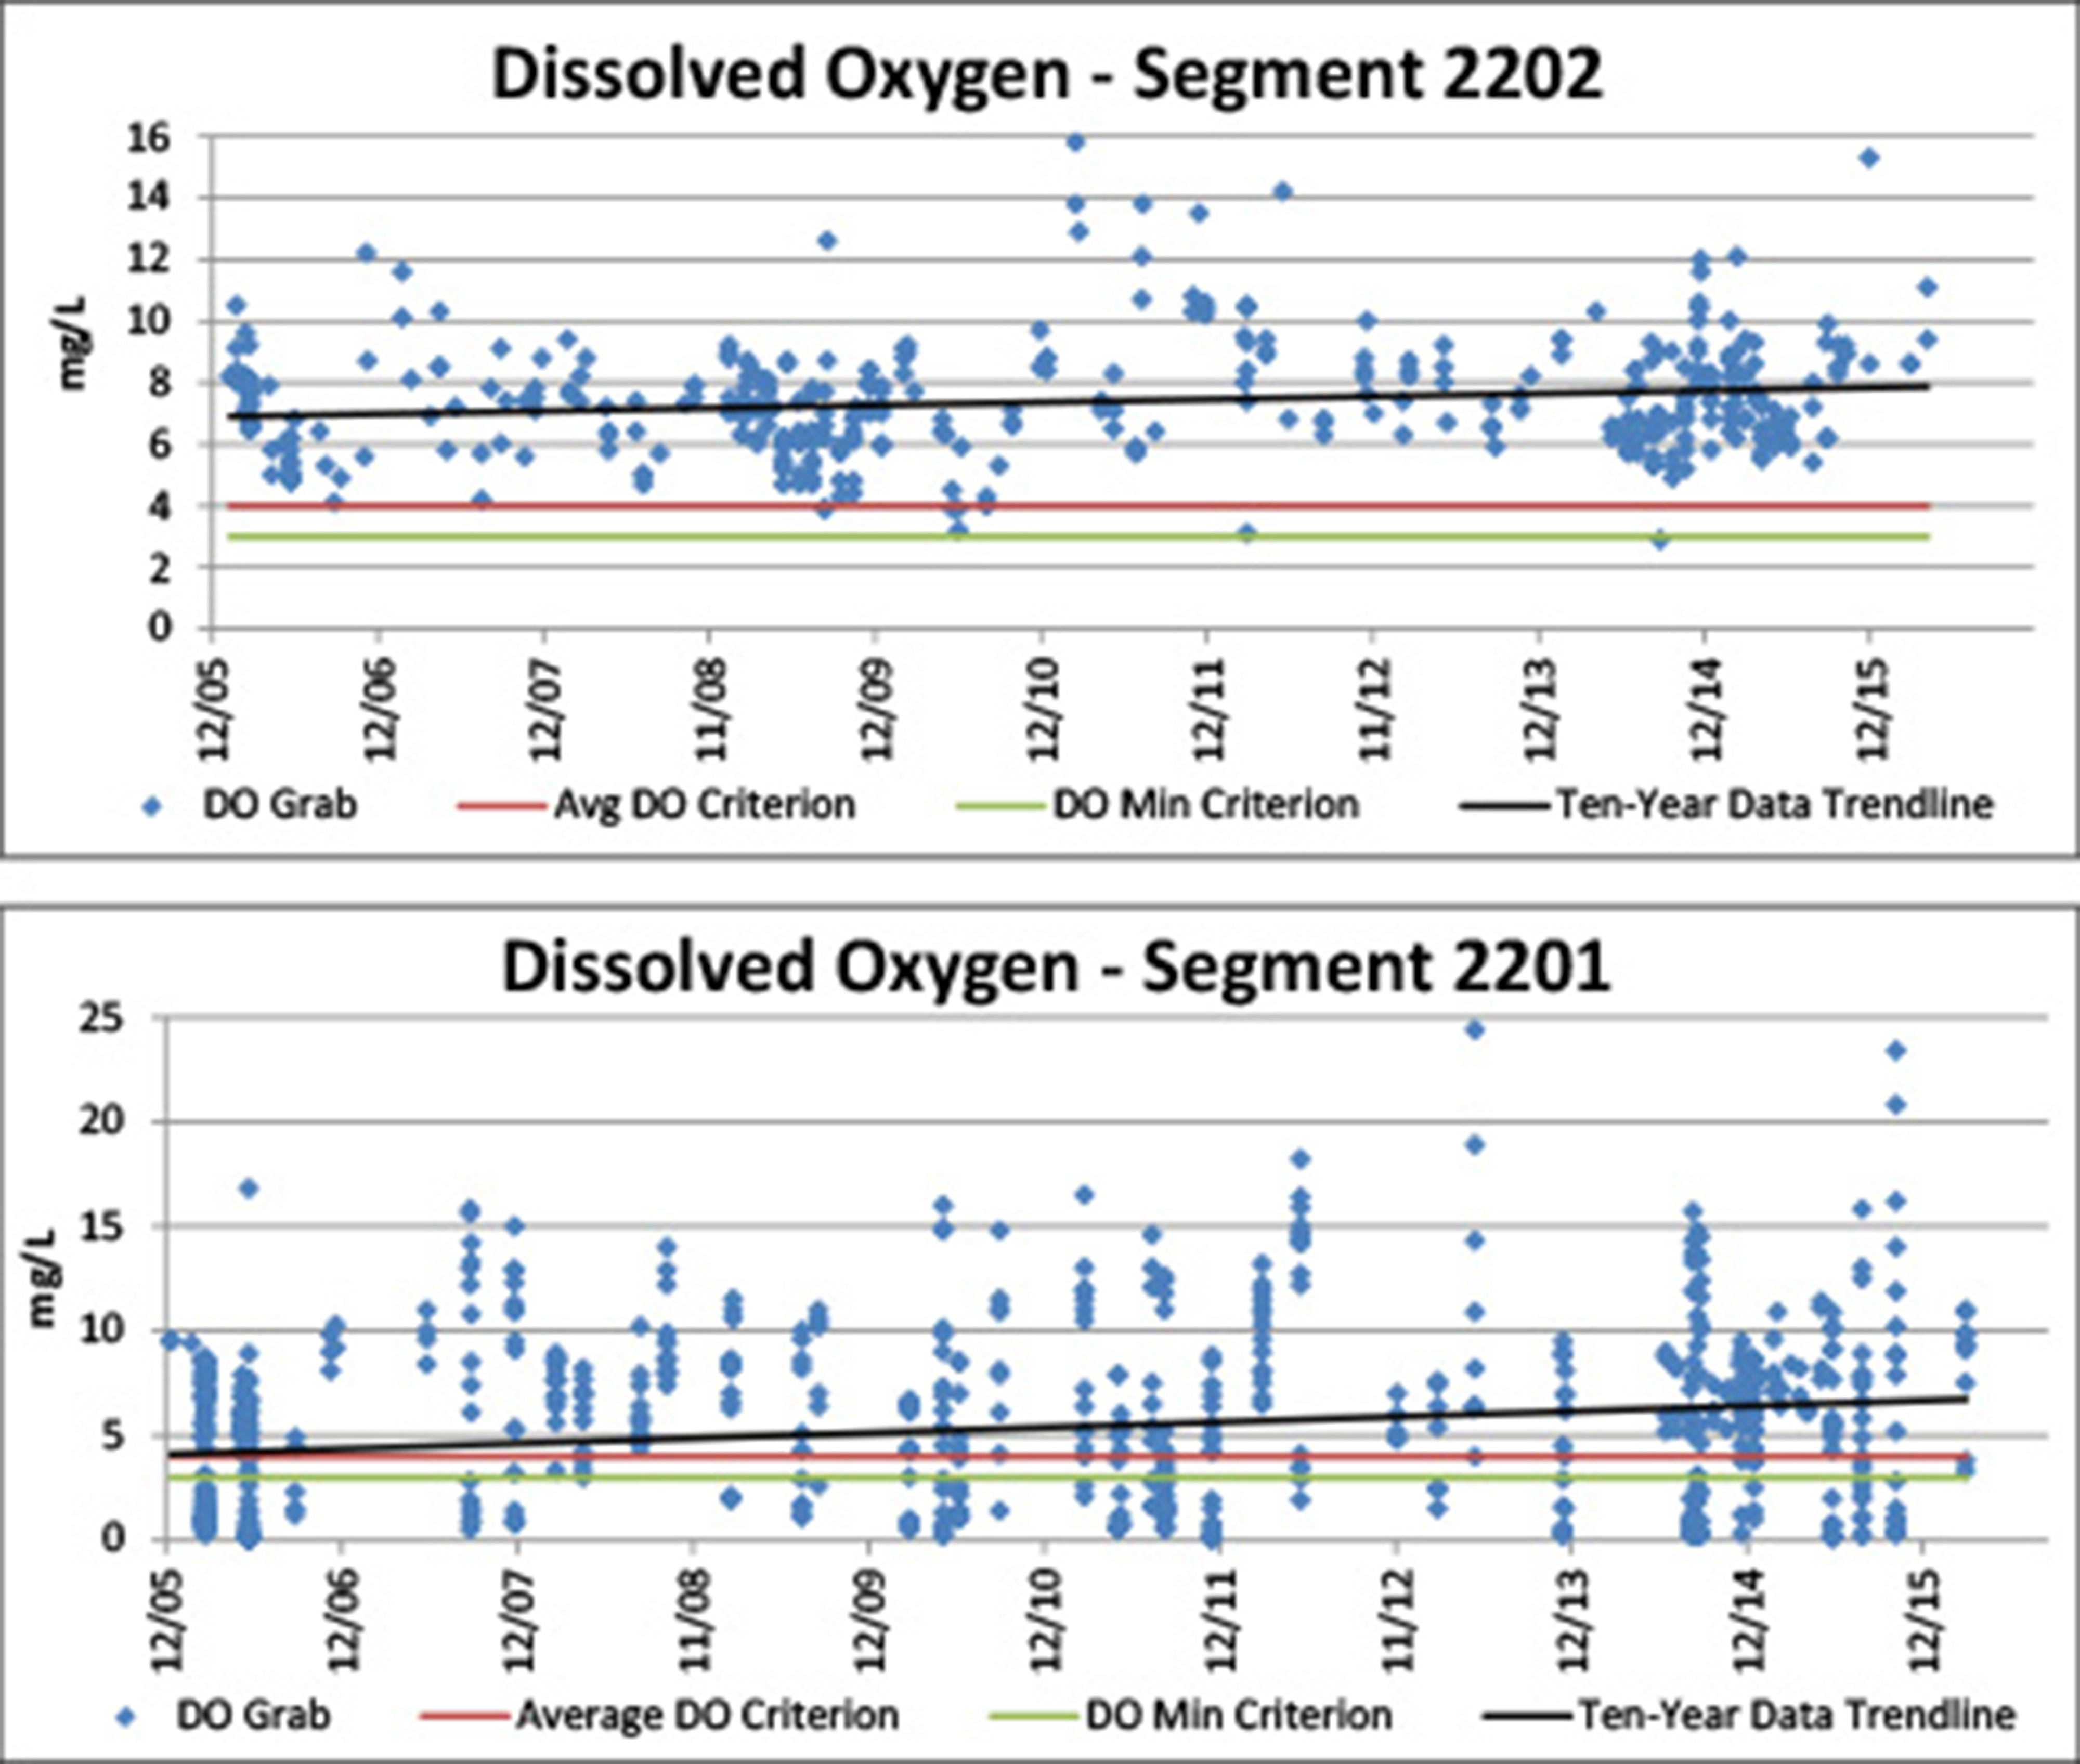 Figure 4.4. DO time series data for Segments 2202 and 2201